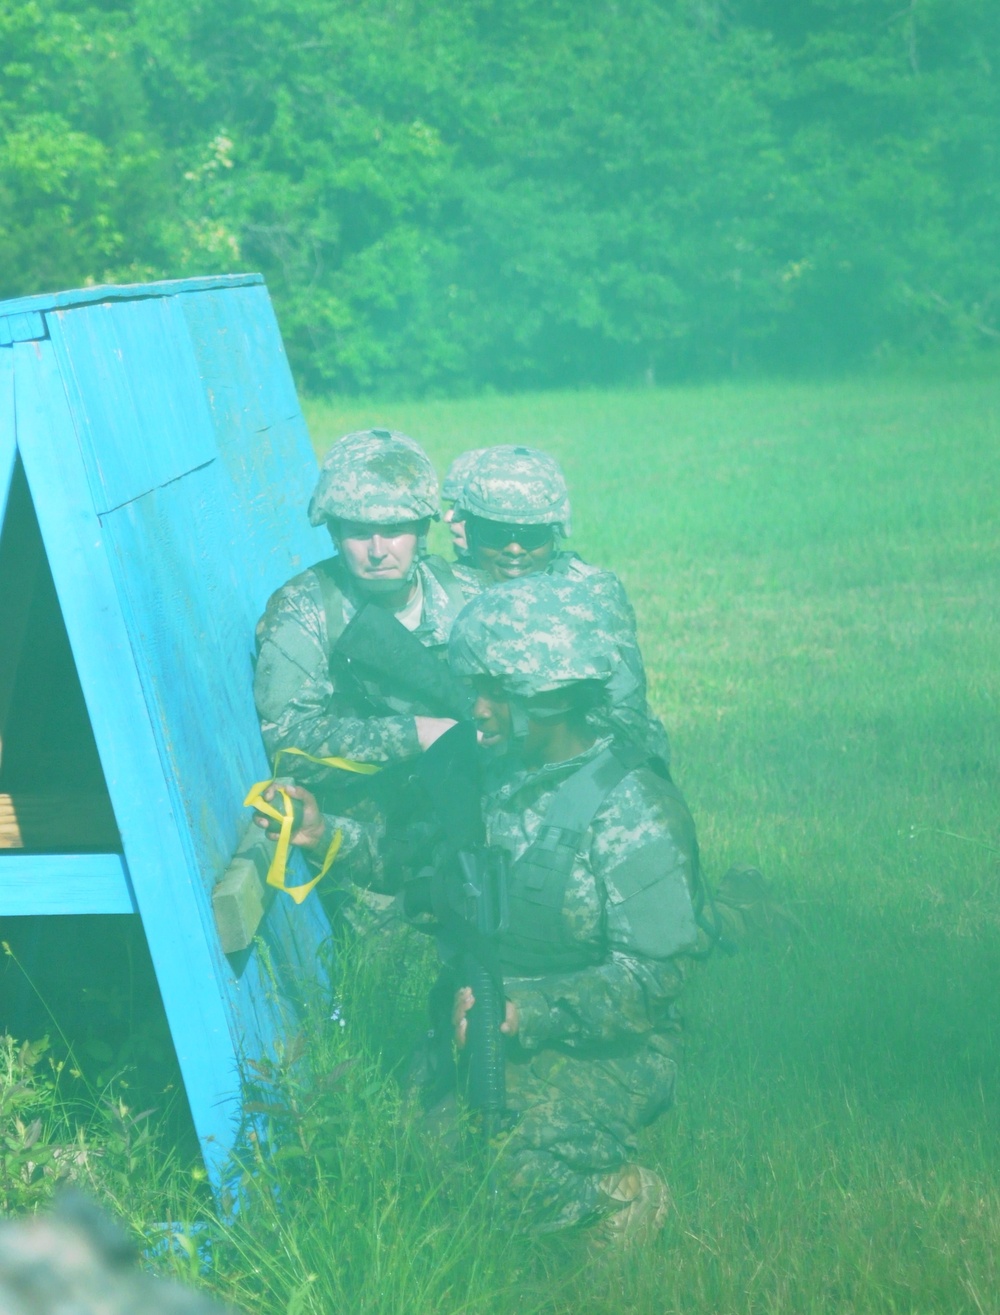 We Are Soldiers First Company completes basic soldier skills course during annual training